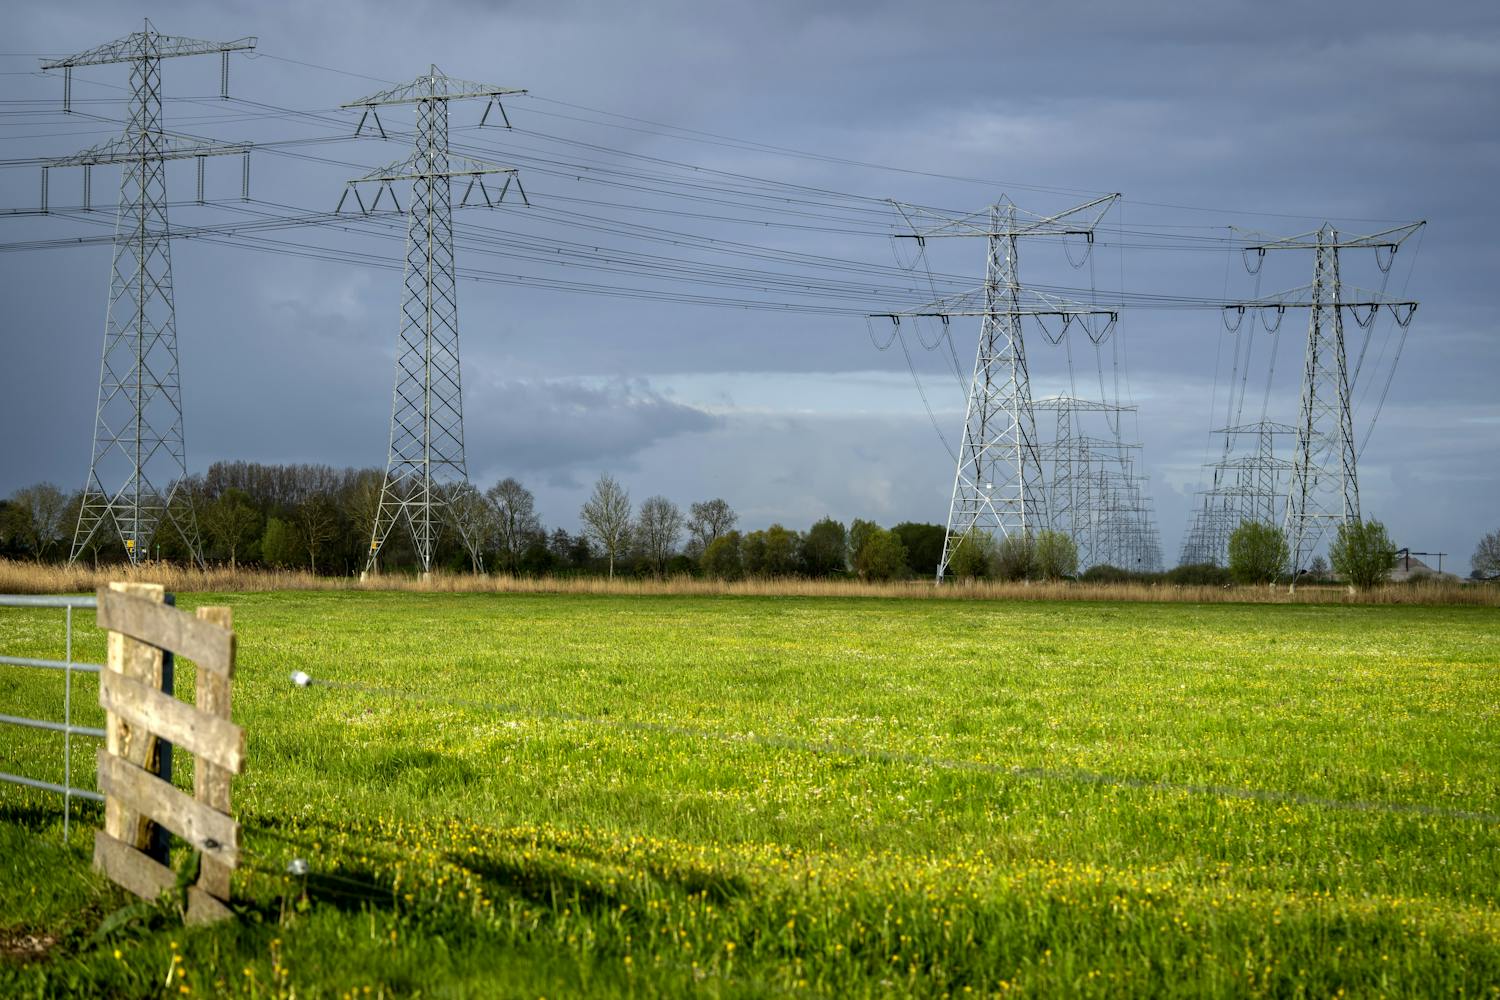 Aleander: 11,000 football pitches needed to expand electricity grid